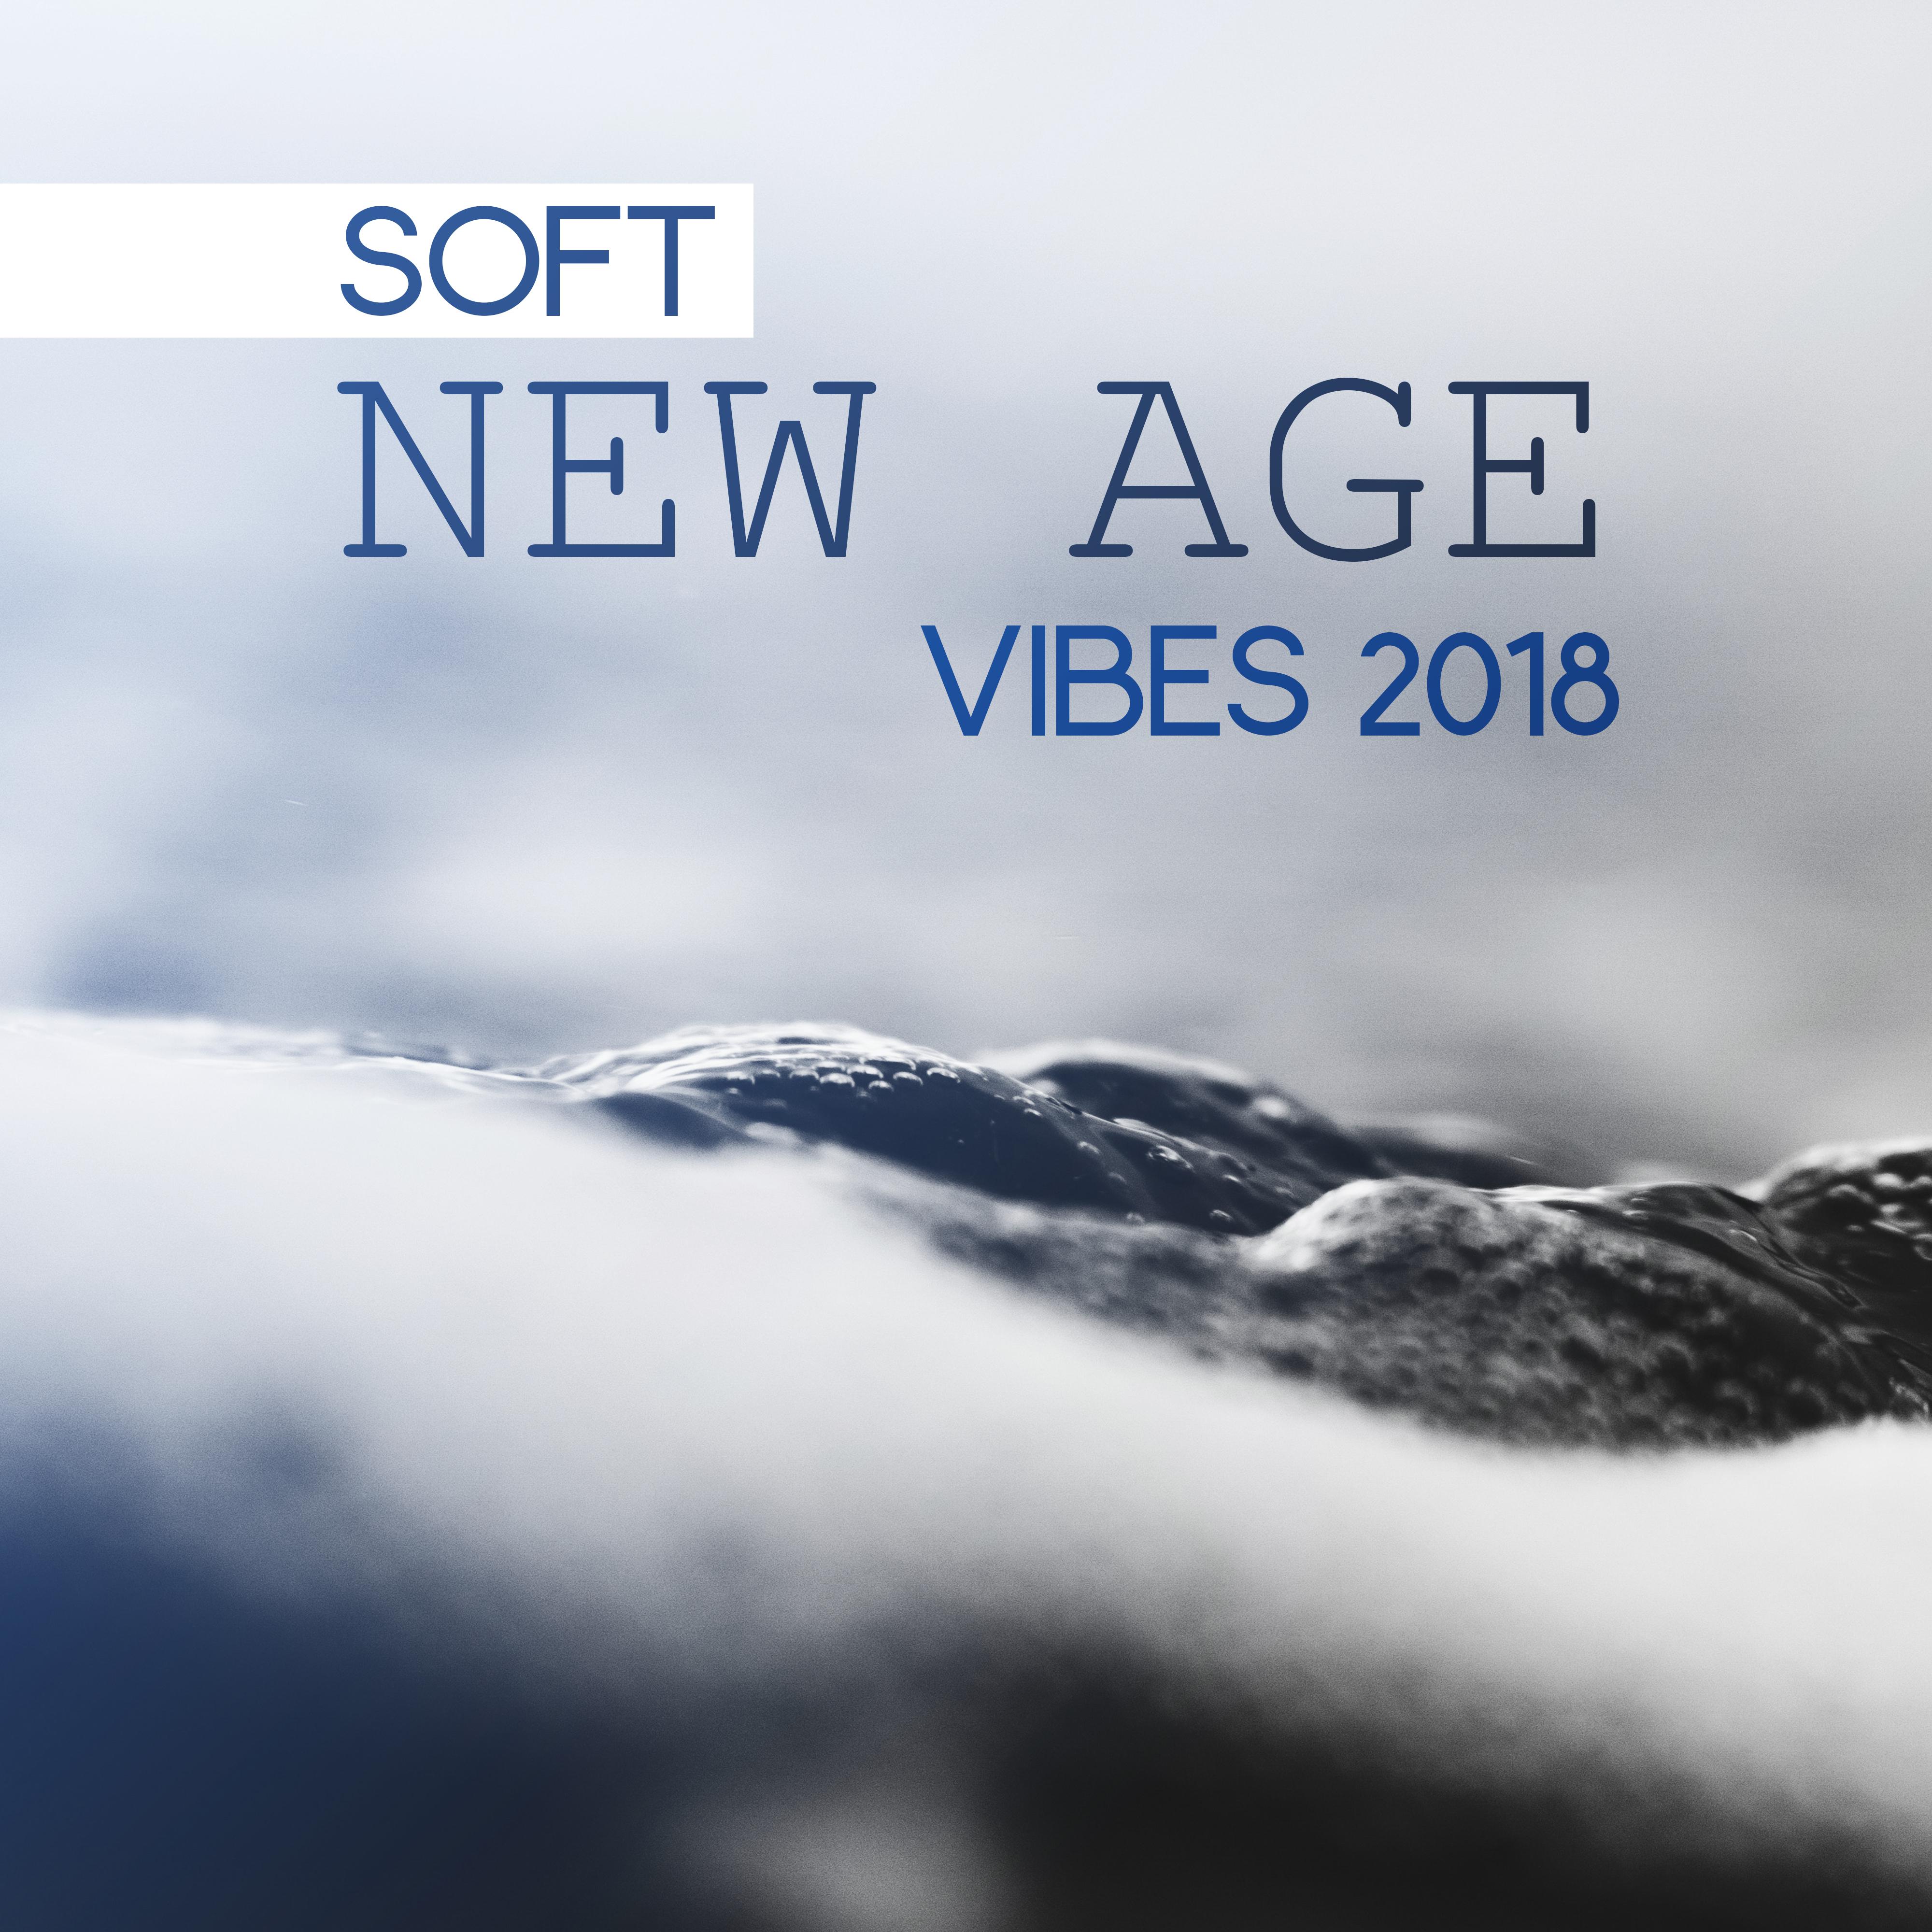 Soft New Age Vibes 2018